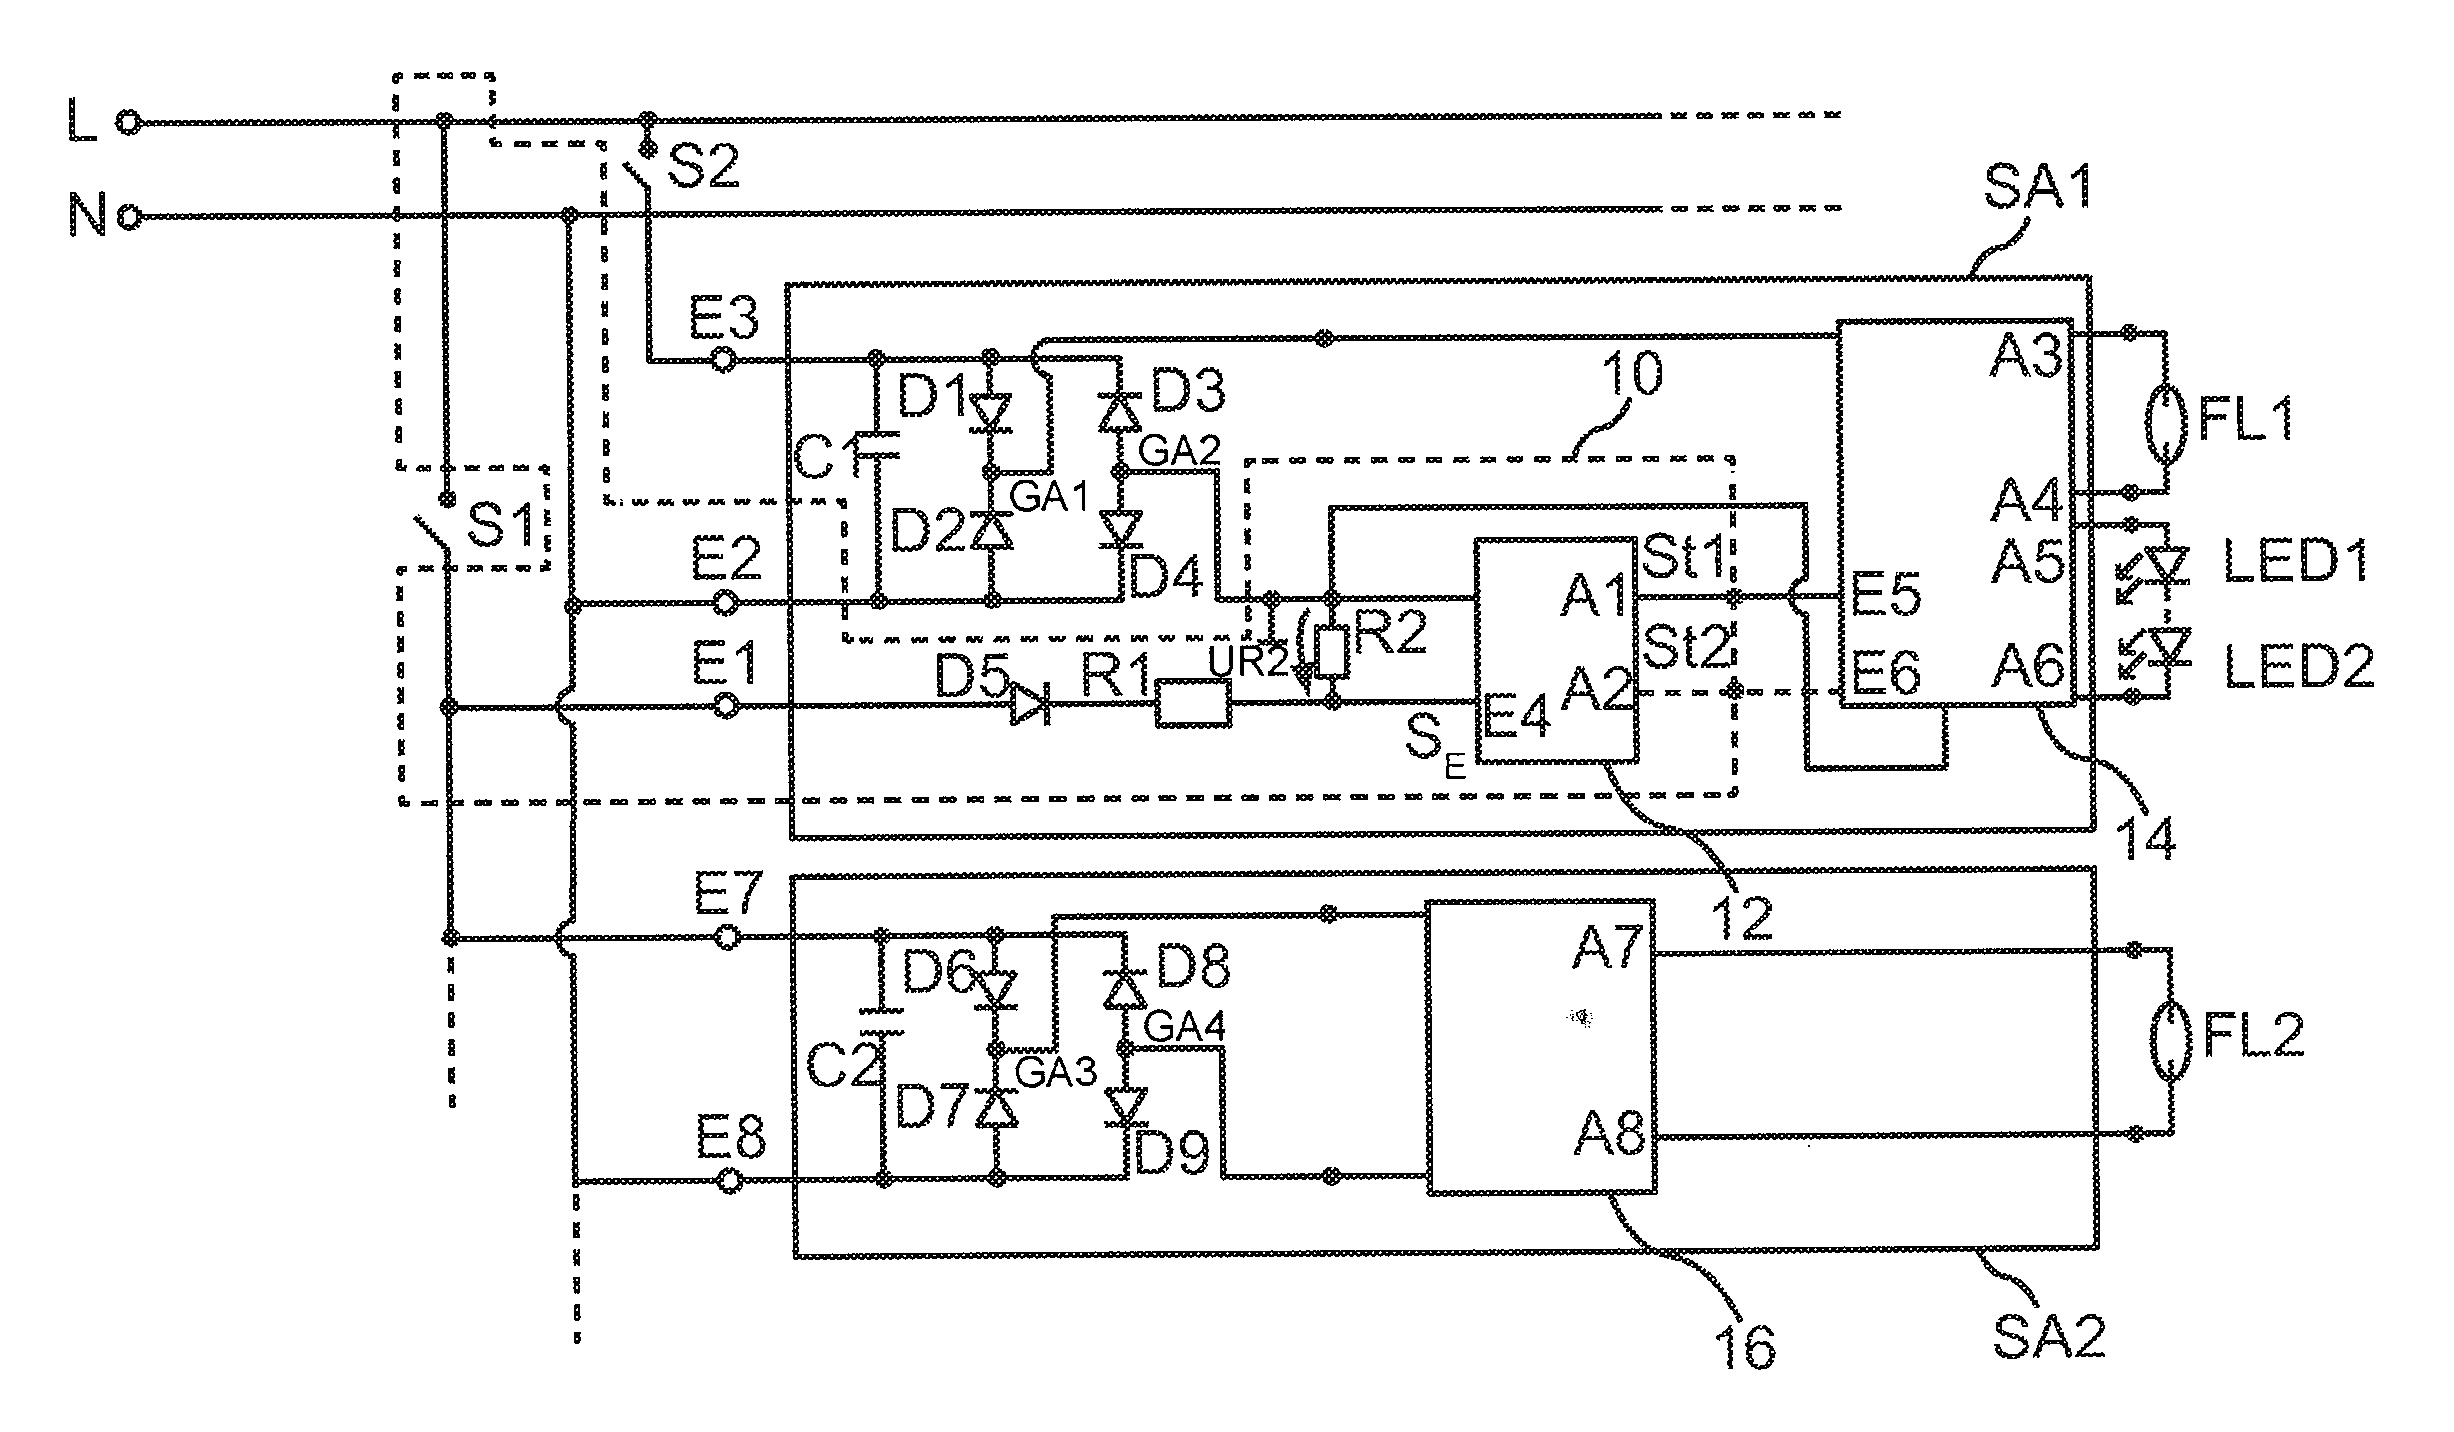 Control Apparatus for a Circuit Arrangement for Operating a Light Source, as well as a System Comprising a Circuit Arrangement and a Circuit Arrangement, as well as a Method for Operating a Light Source